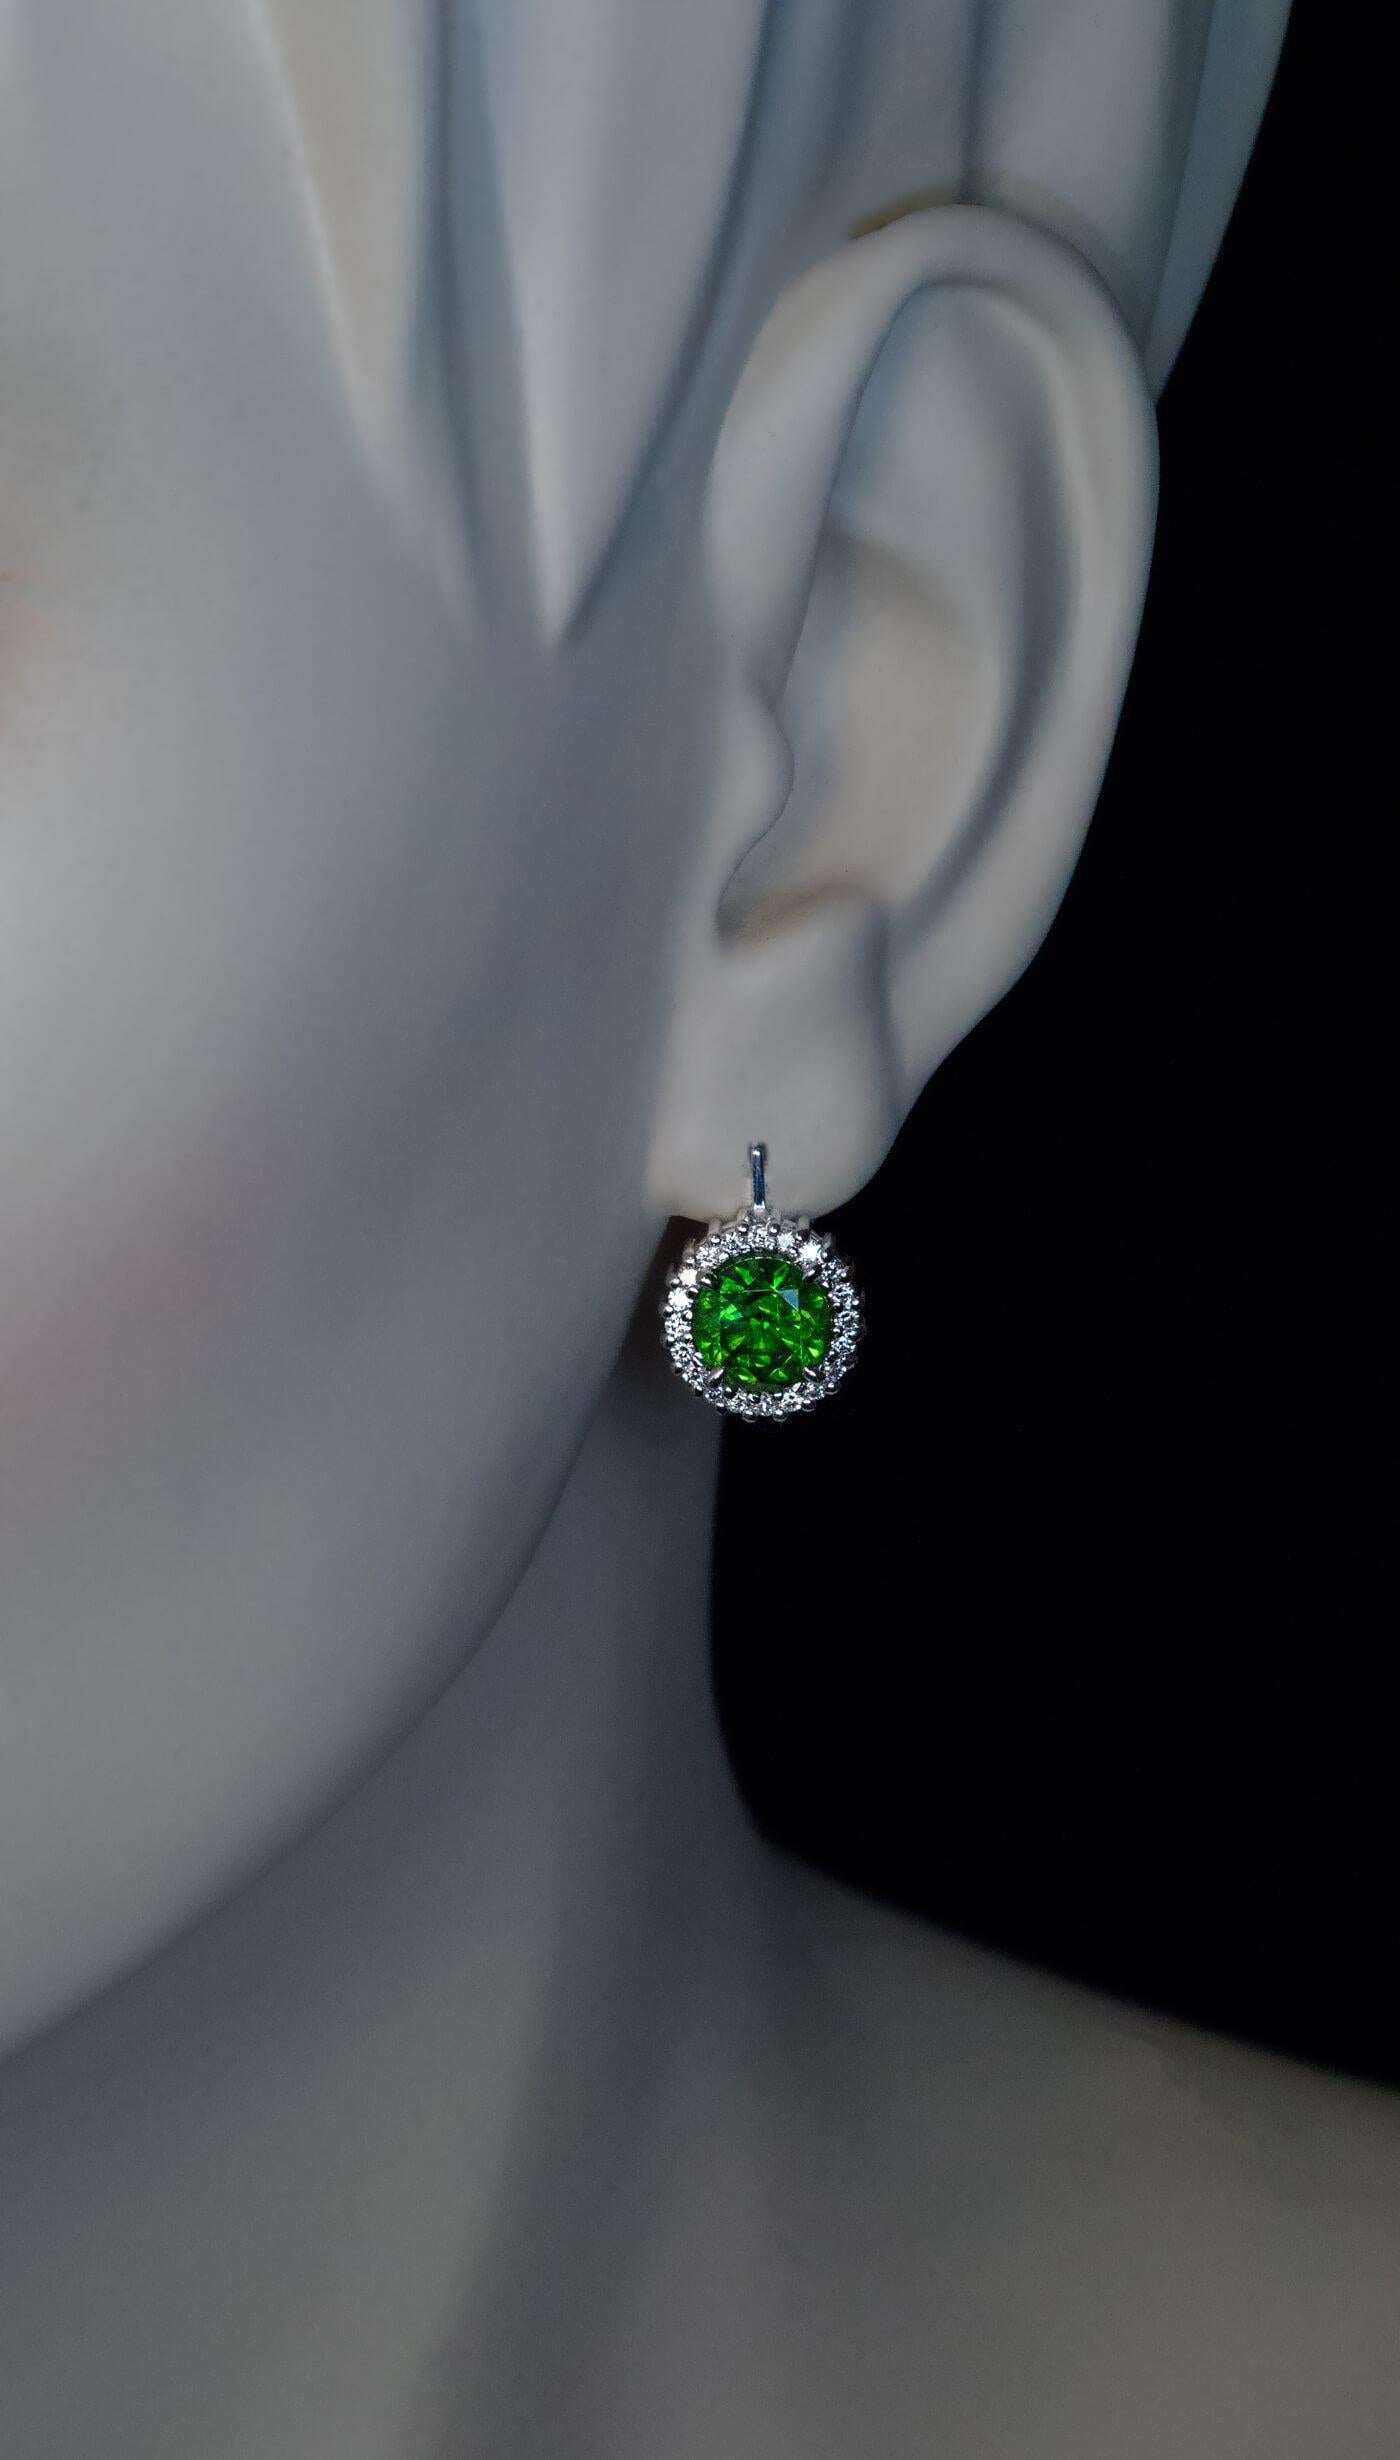 These contemporary custom-made 14K white gold earrings feature a pair of excellent Russian demantoids (2.23 ct and 2.24 ct) of deep pure green color. The center stones are encircled by bright white diamonds (F-G color, VS2-SI1 clarity).

Demantoids